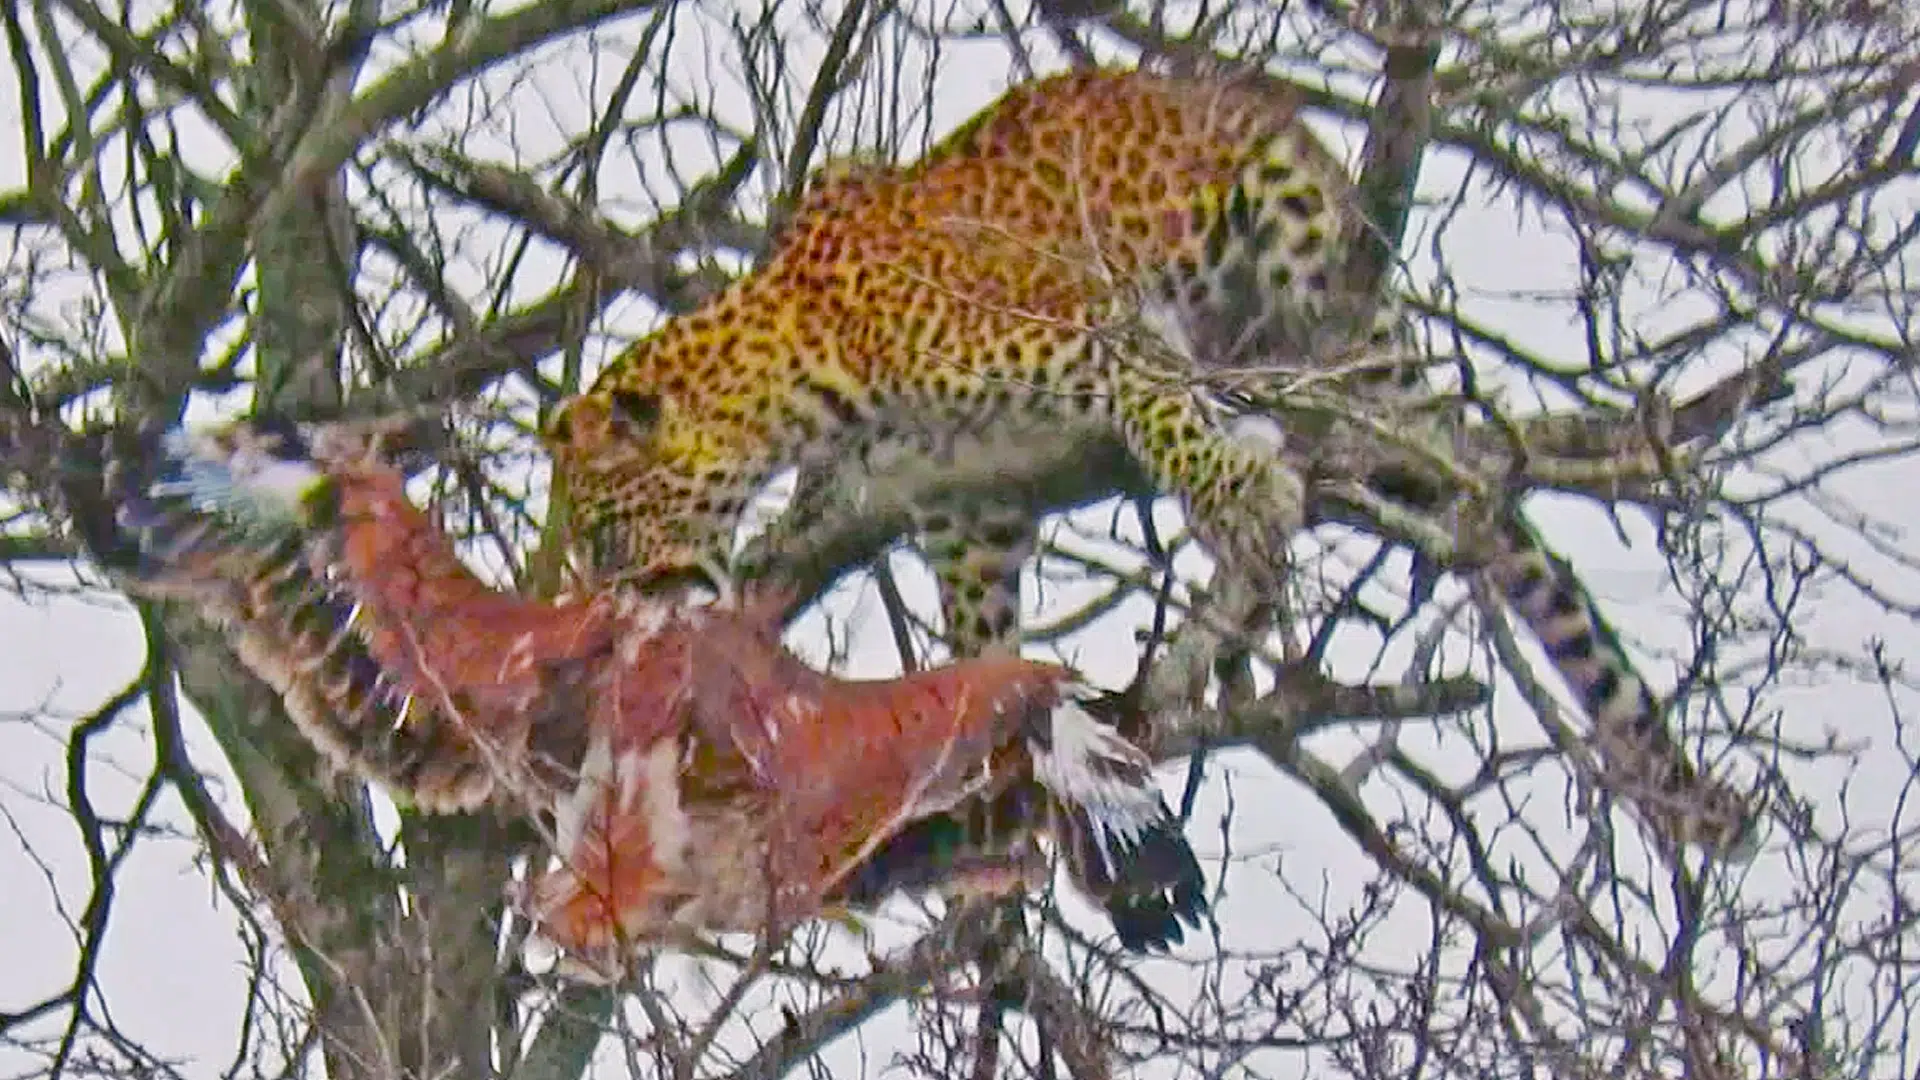 Leopard Risks it All at Extreme Height to Raid Eagle’s Nest